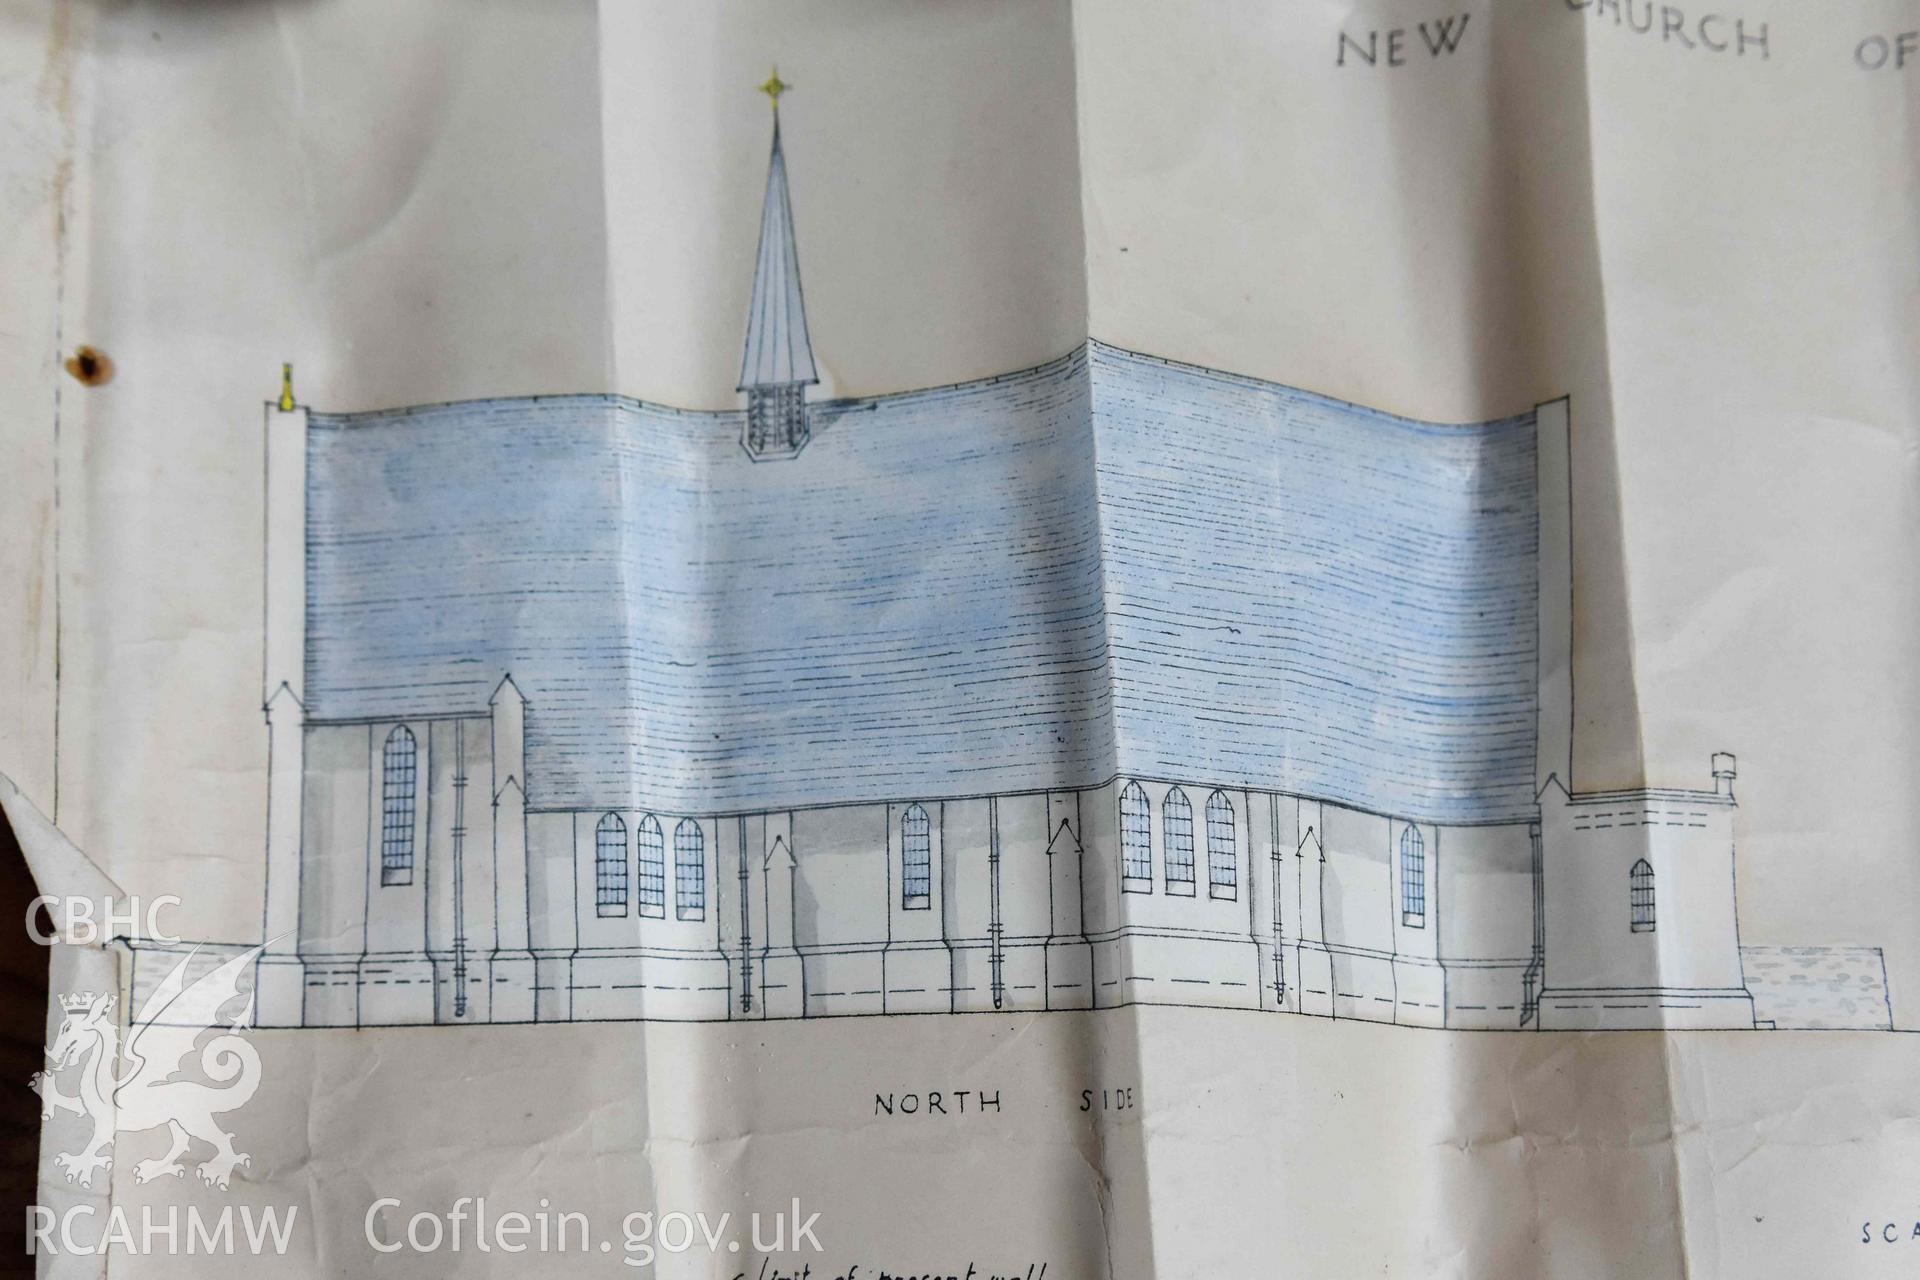 St Peter's Church, copy of architect's elevation drawing.